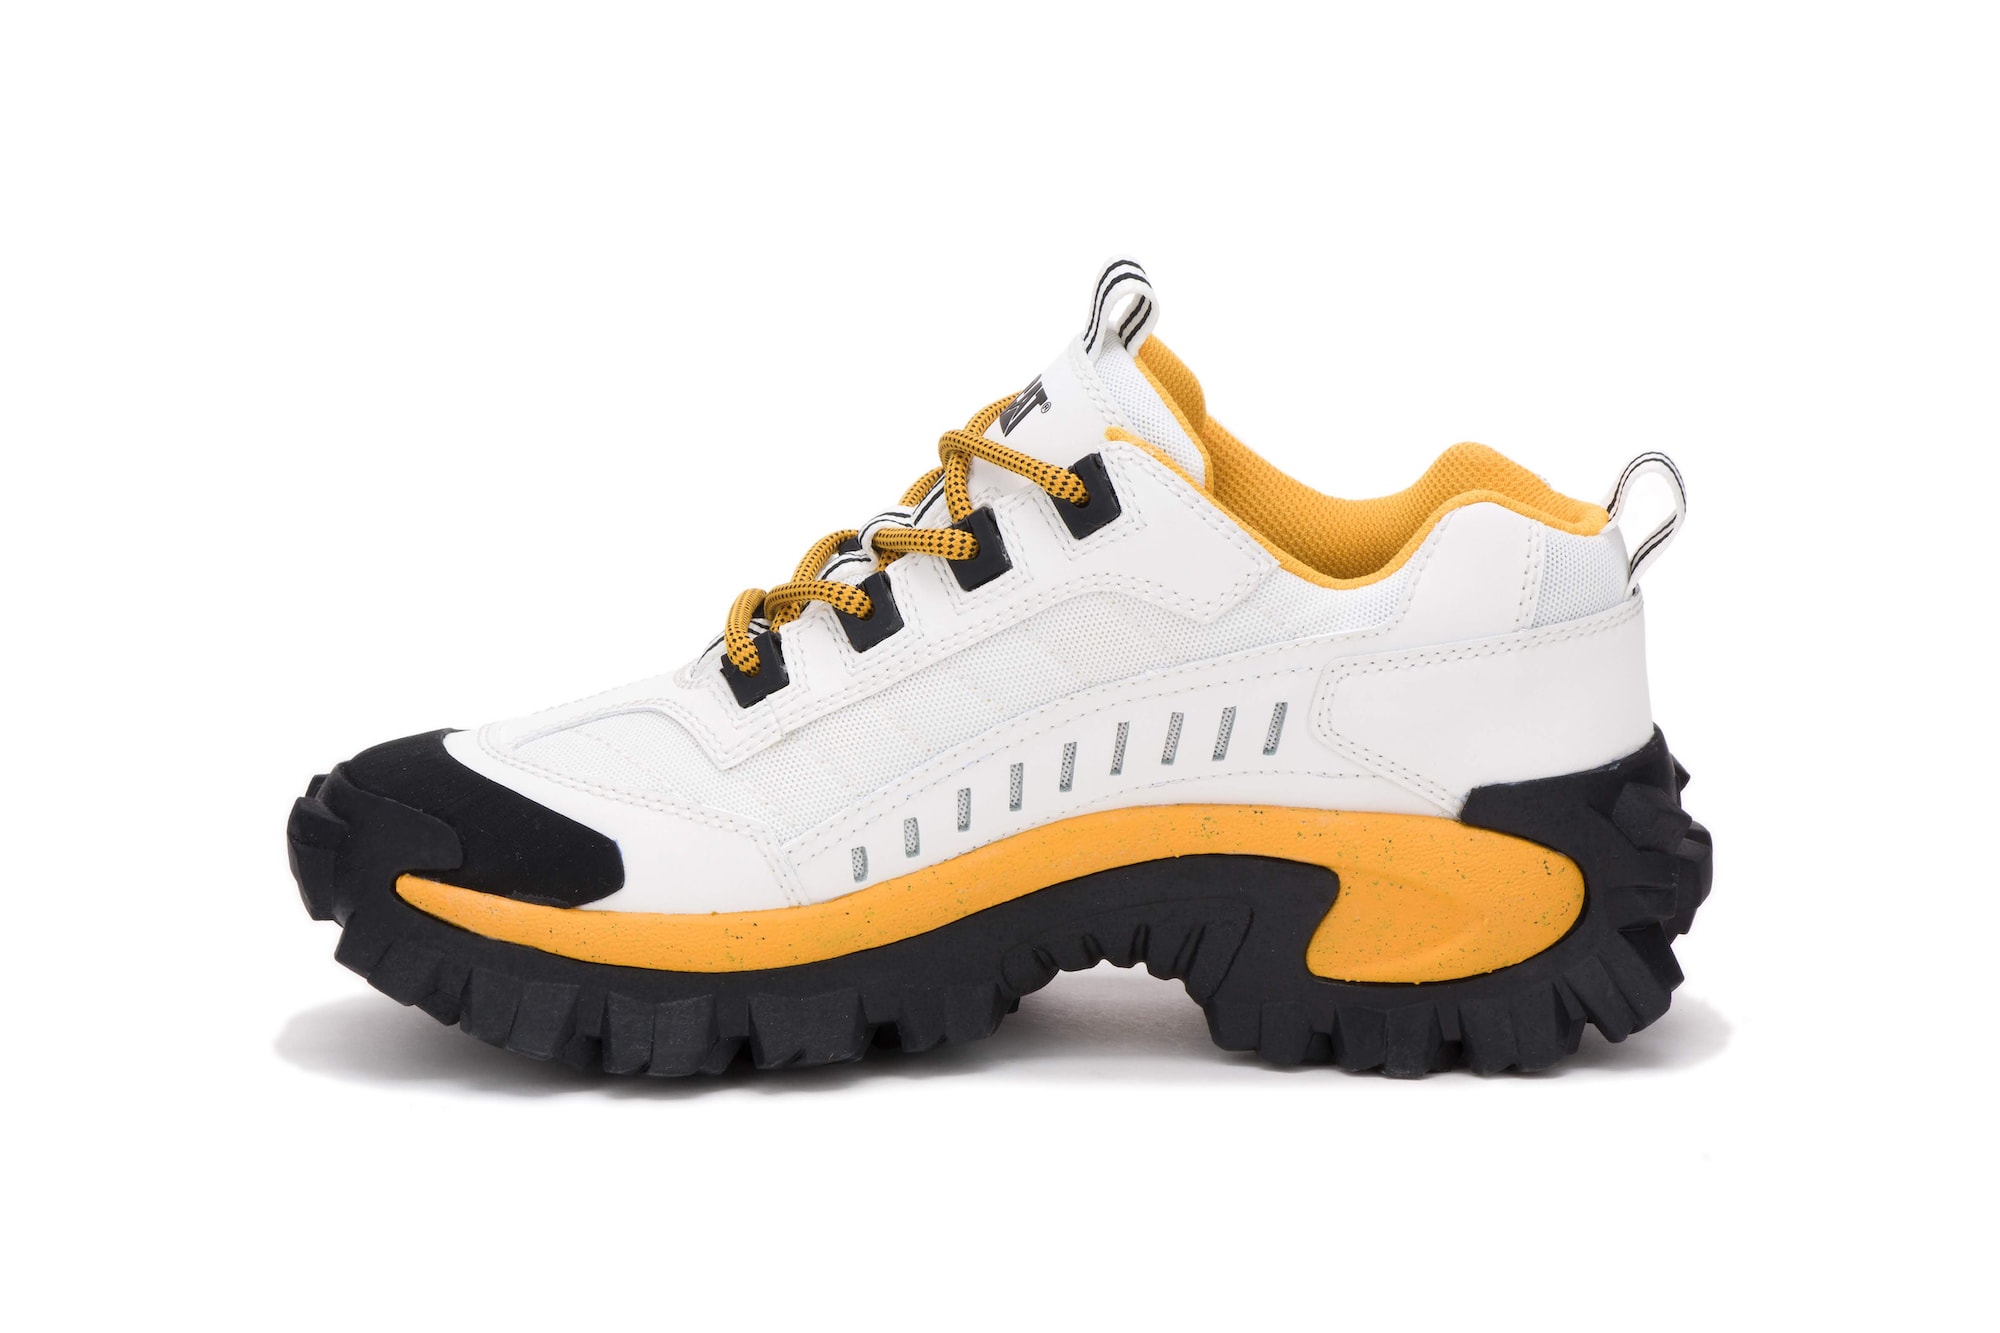 CAT Footwear Launches Chunky INTRUDER Sneaker